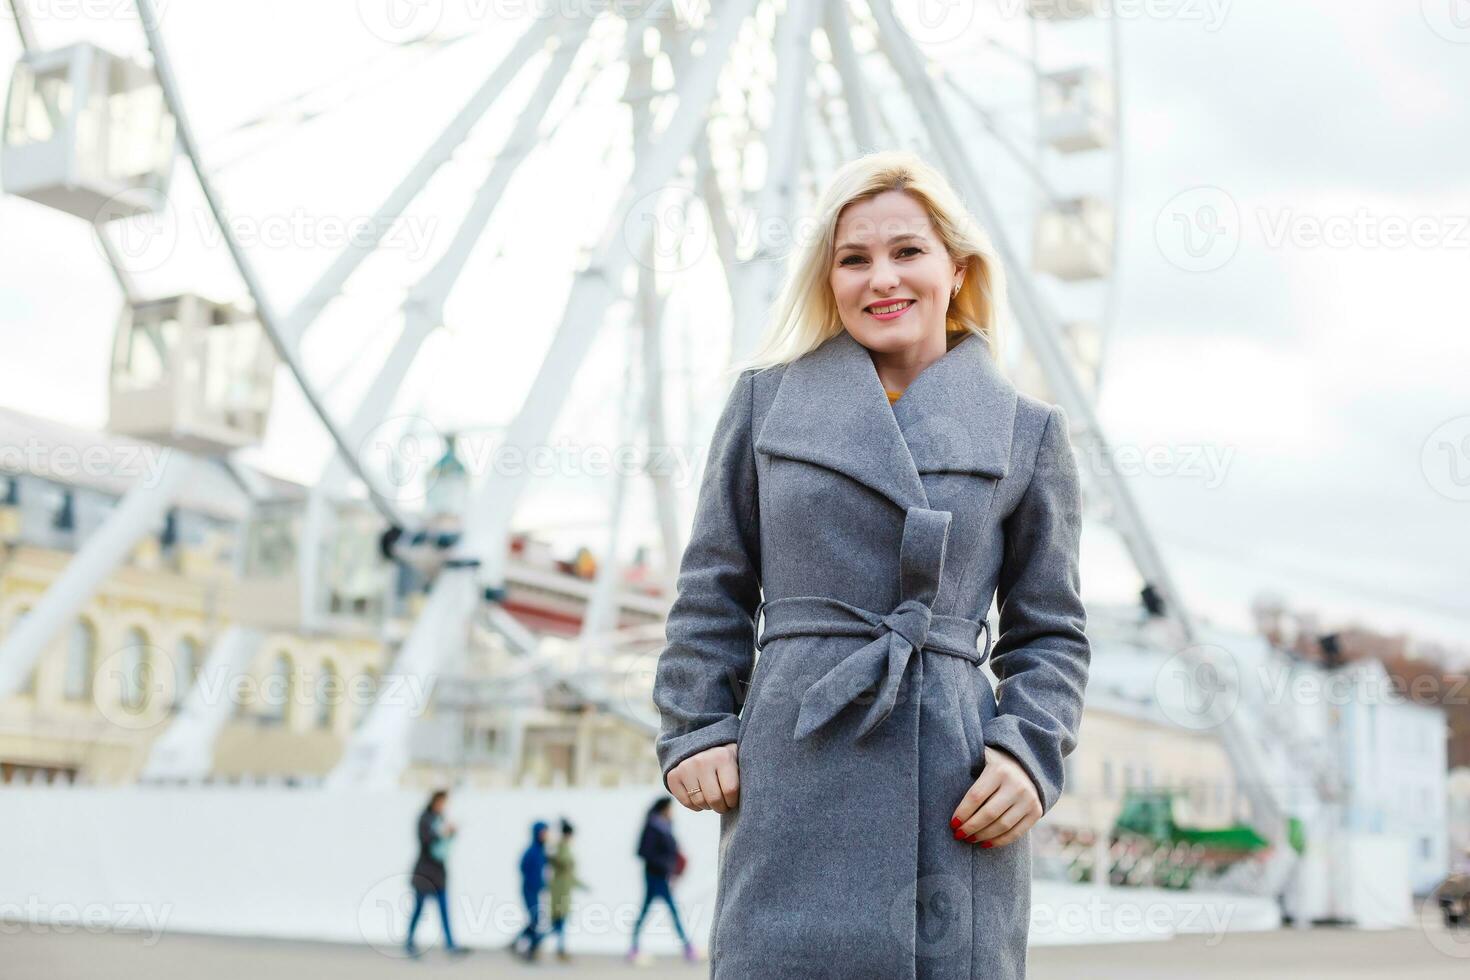 Young woman walking outdoors on the city street near ferris wheel smiling cheerful. photo